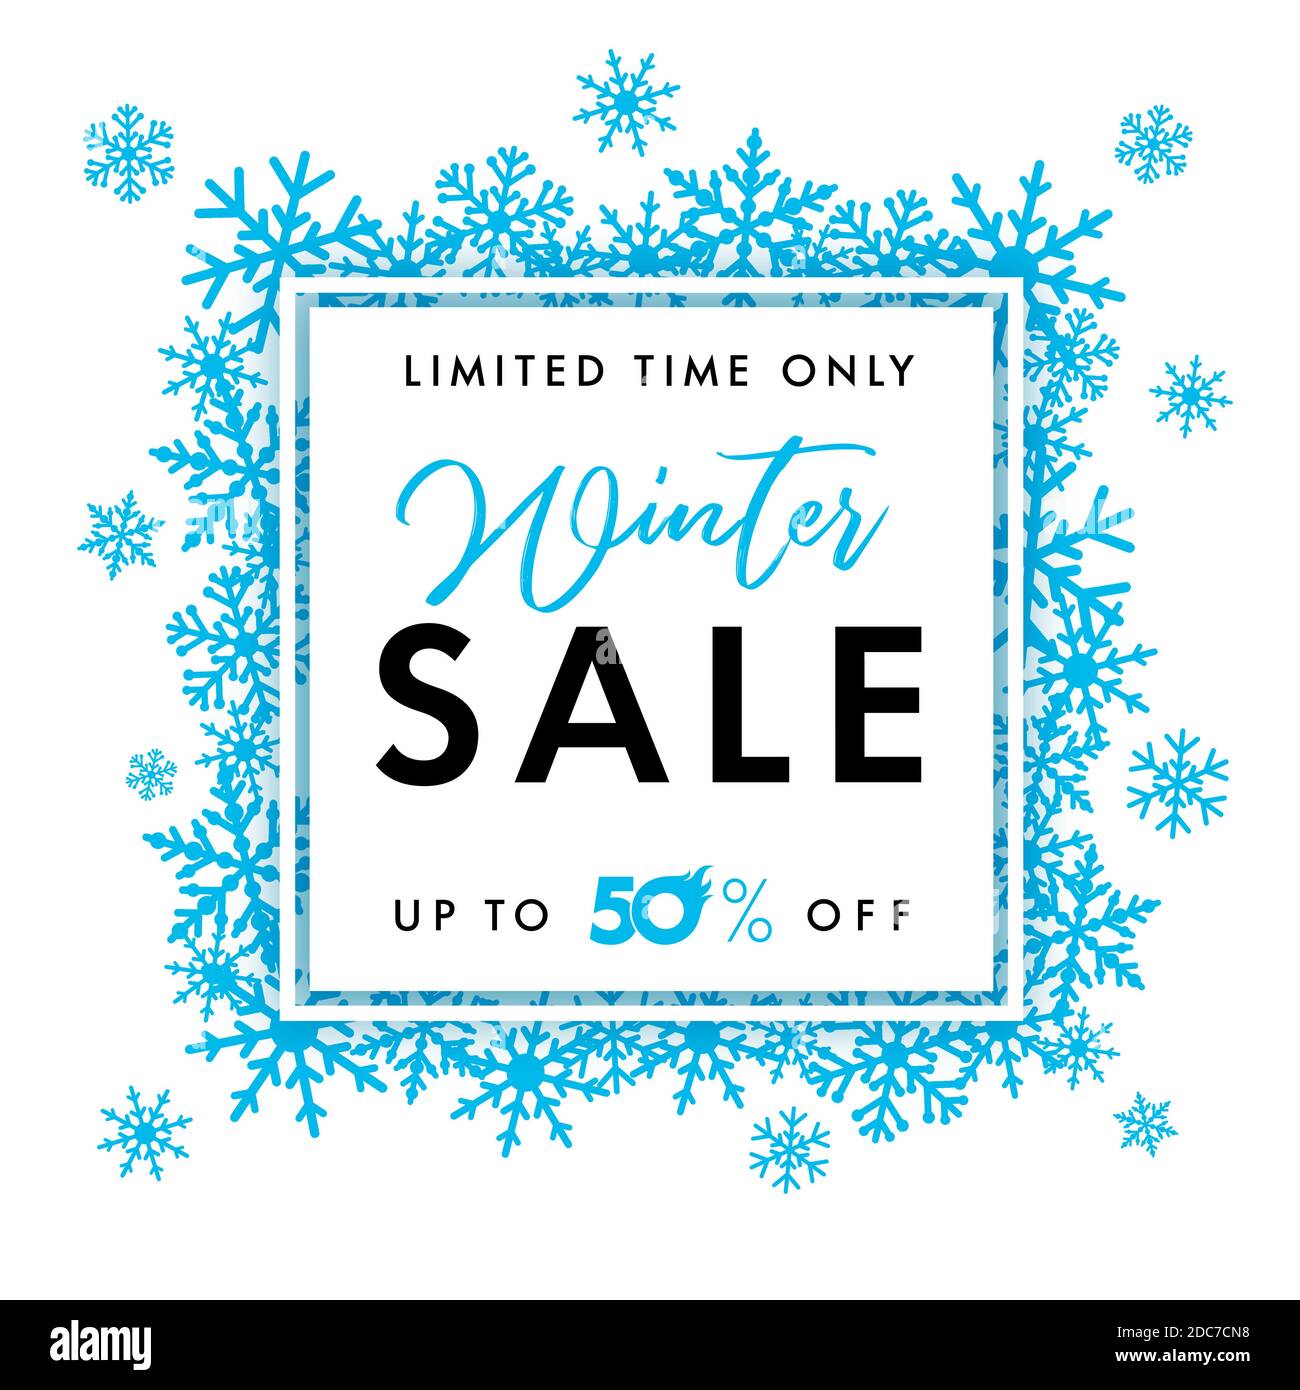 Winter Sale Poster With White Snowflakes - Stock Illustration